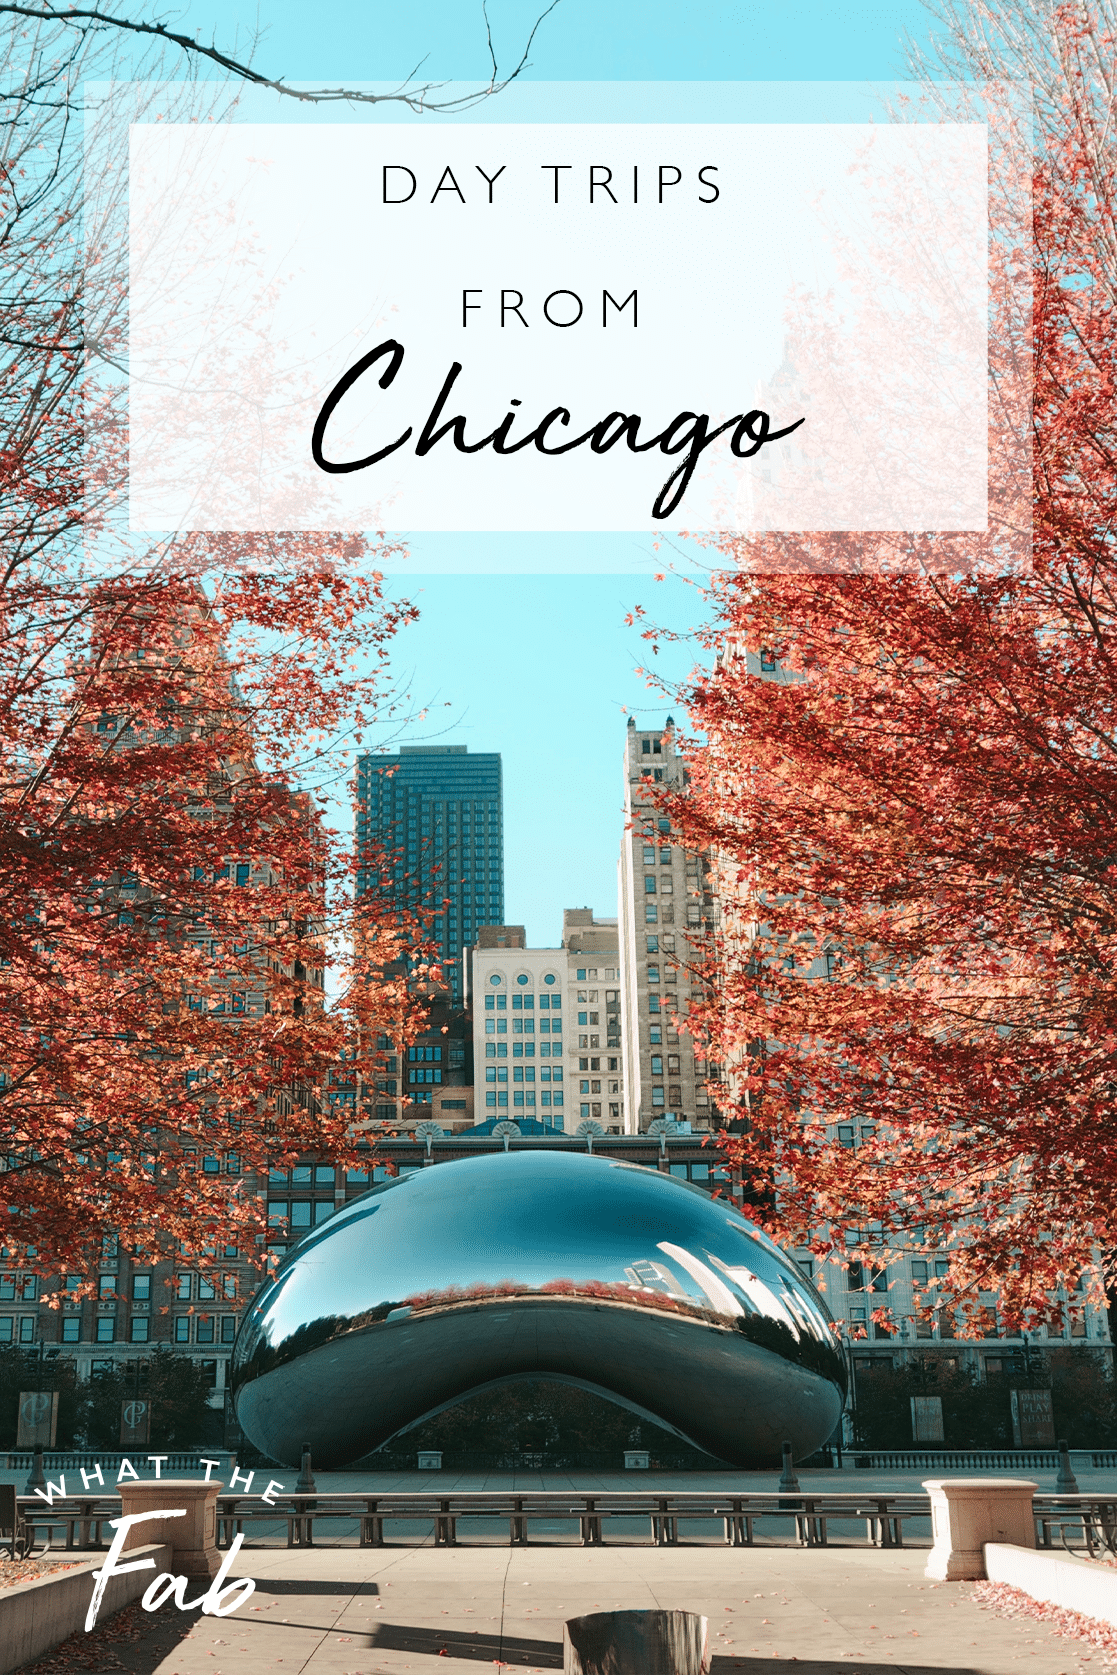 Day Trips From Chicago, by Travel Blogger What The Fab